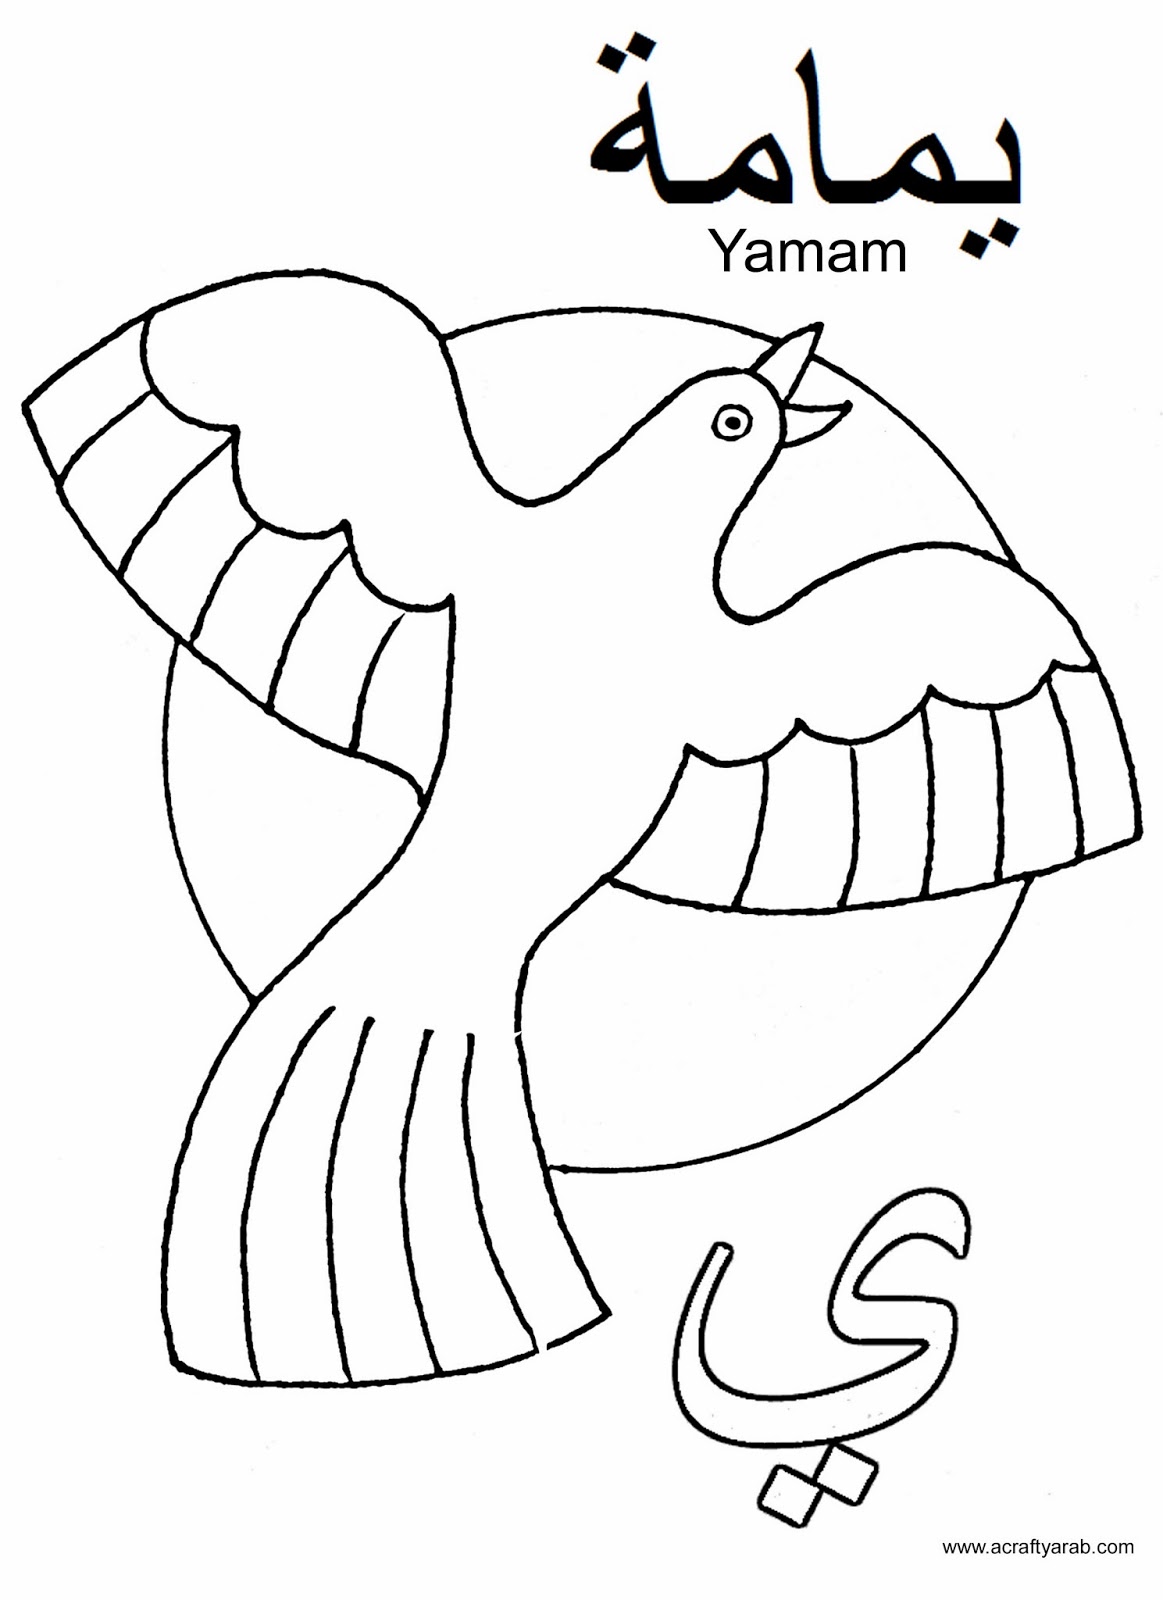 Download A Crafty Arab: Arabic Alphabet coloring pages...Ya is for ...